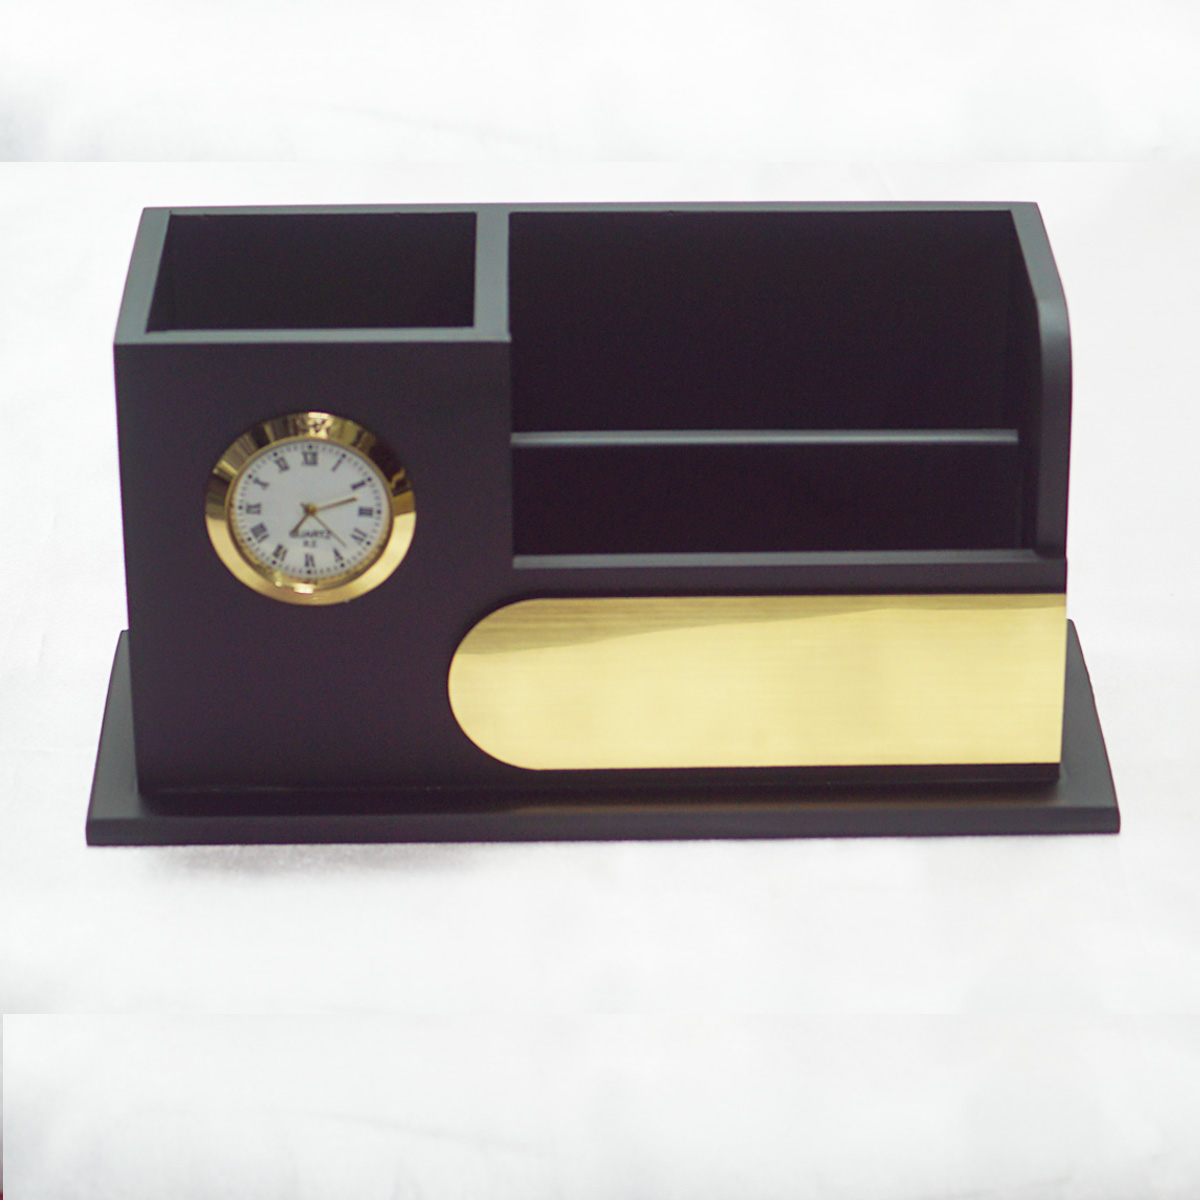 penhouse.in Customized Plastic Pen Stand with Clock And Holder SKU 87165